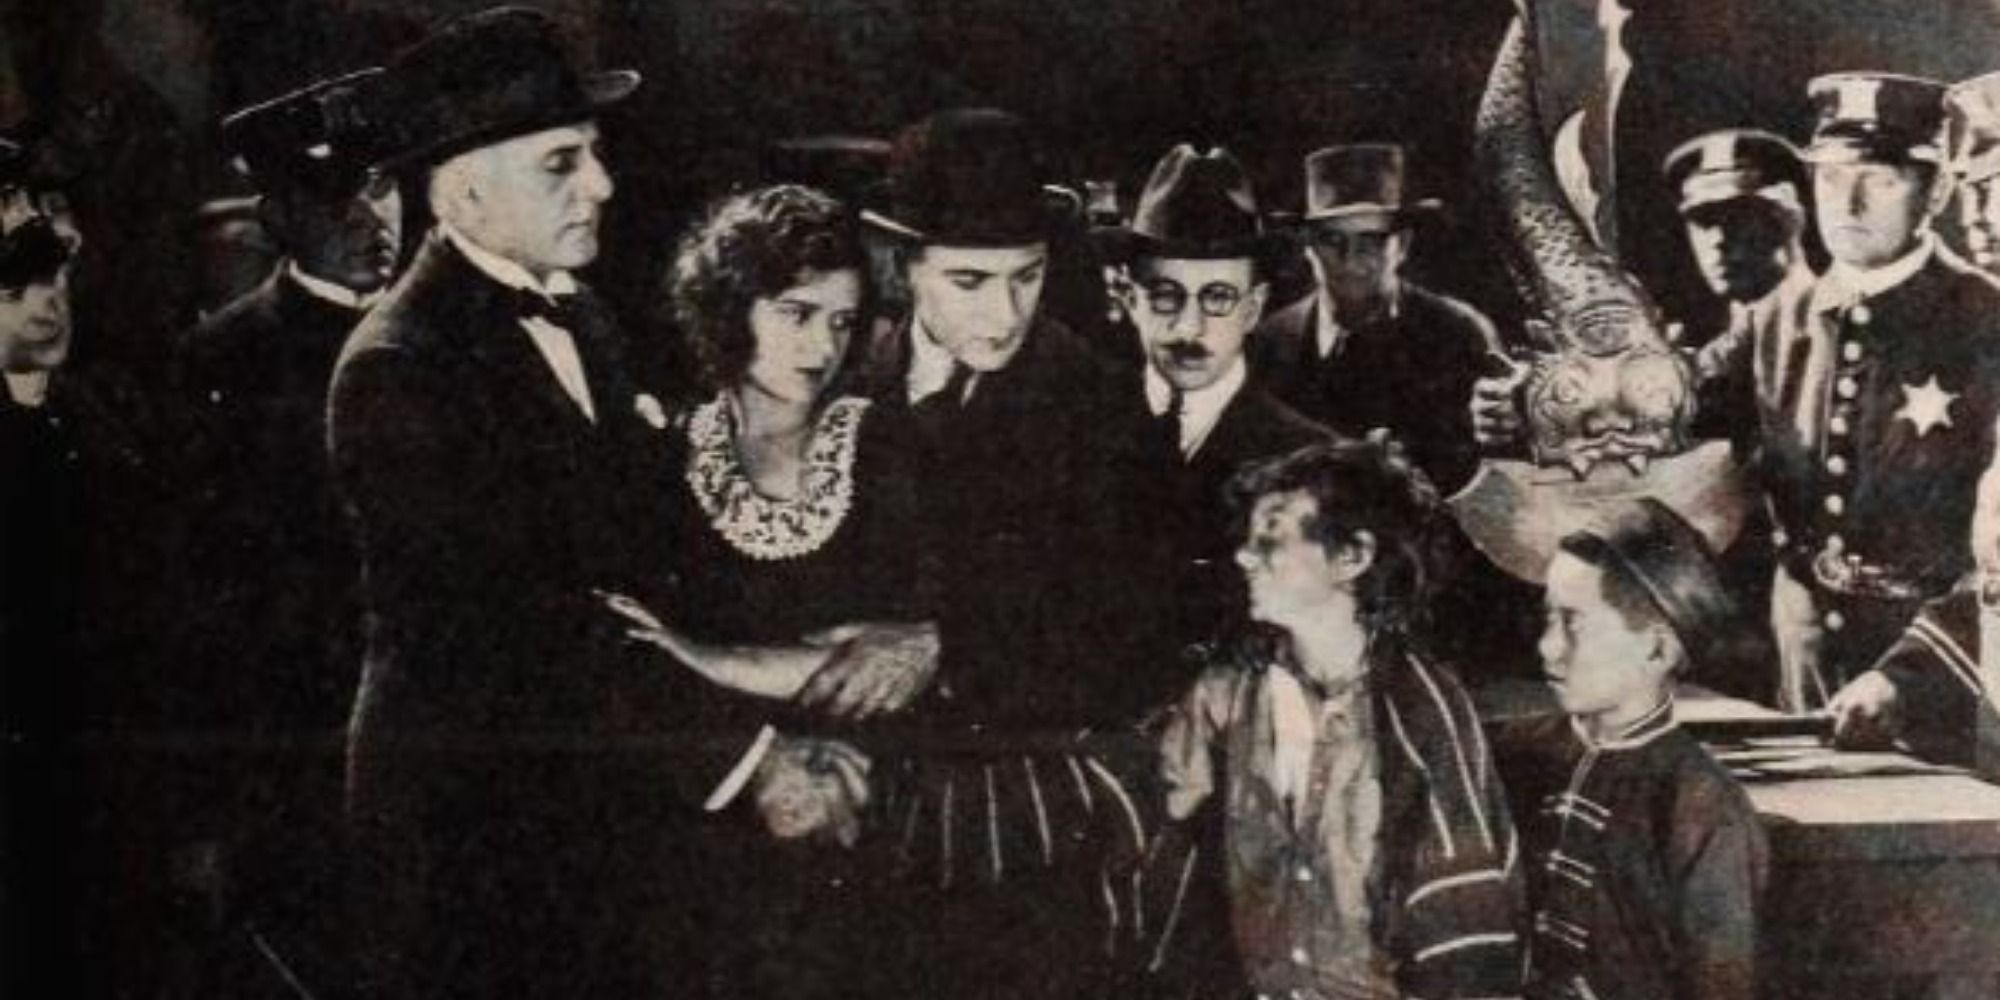 A screenshot from the 1921 silent film Dinty